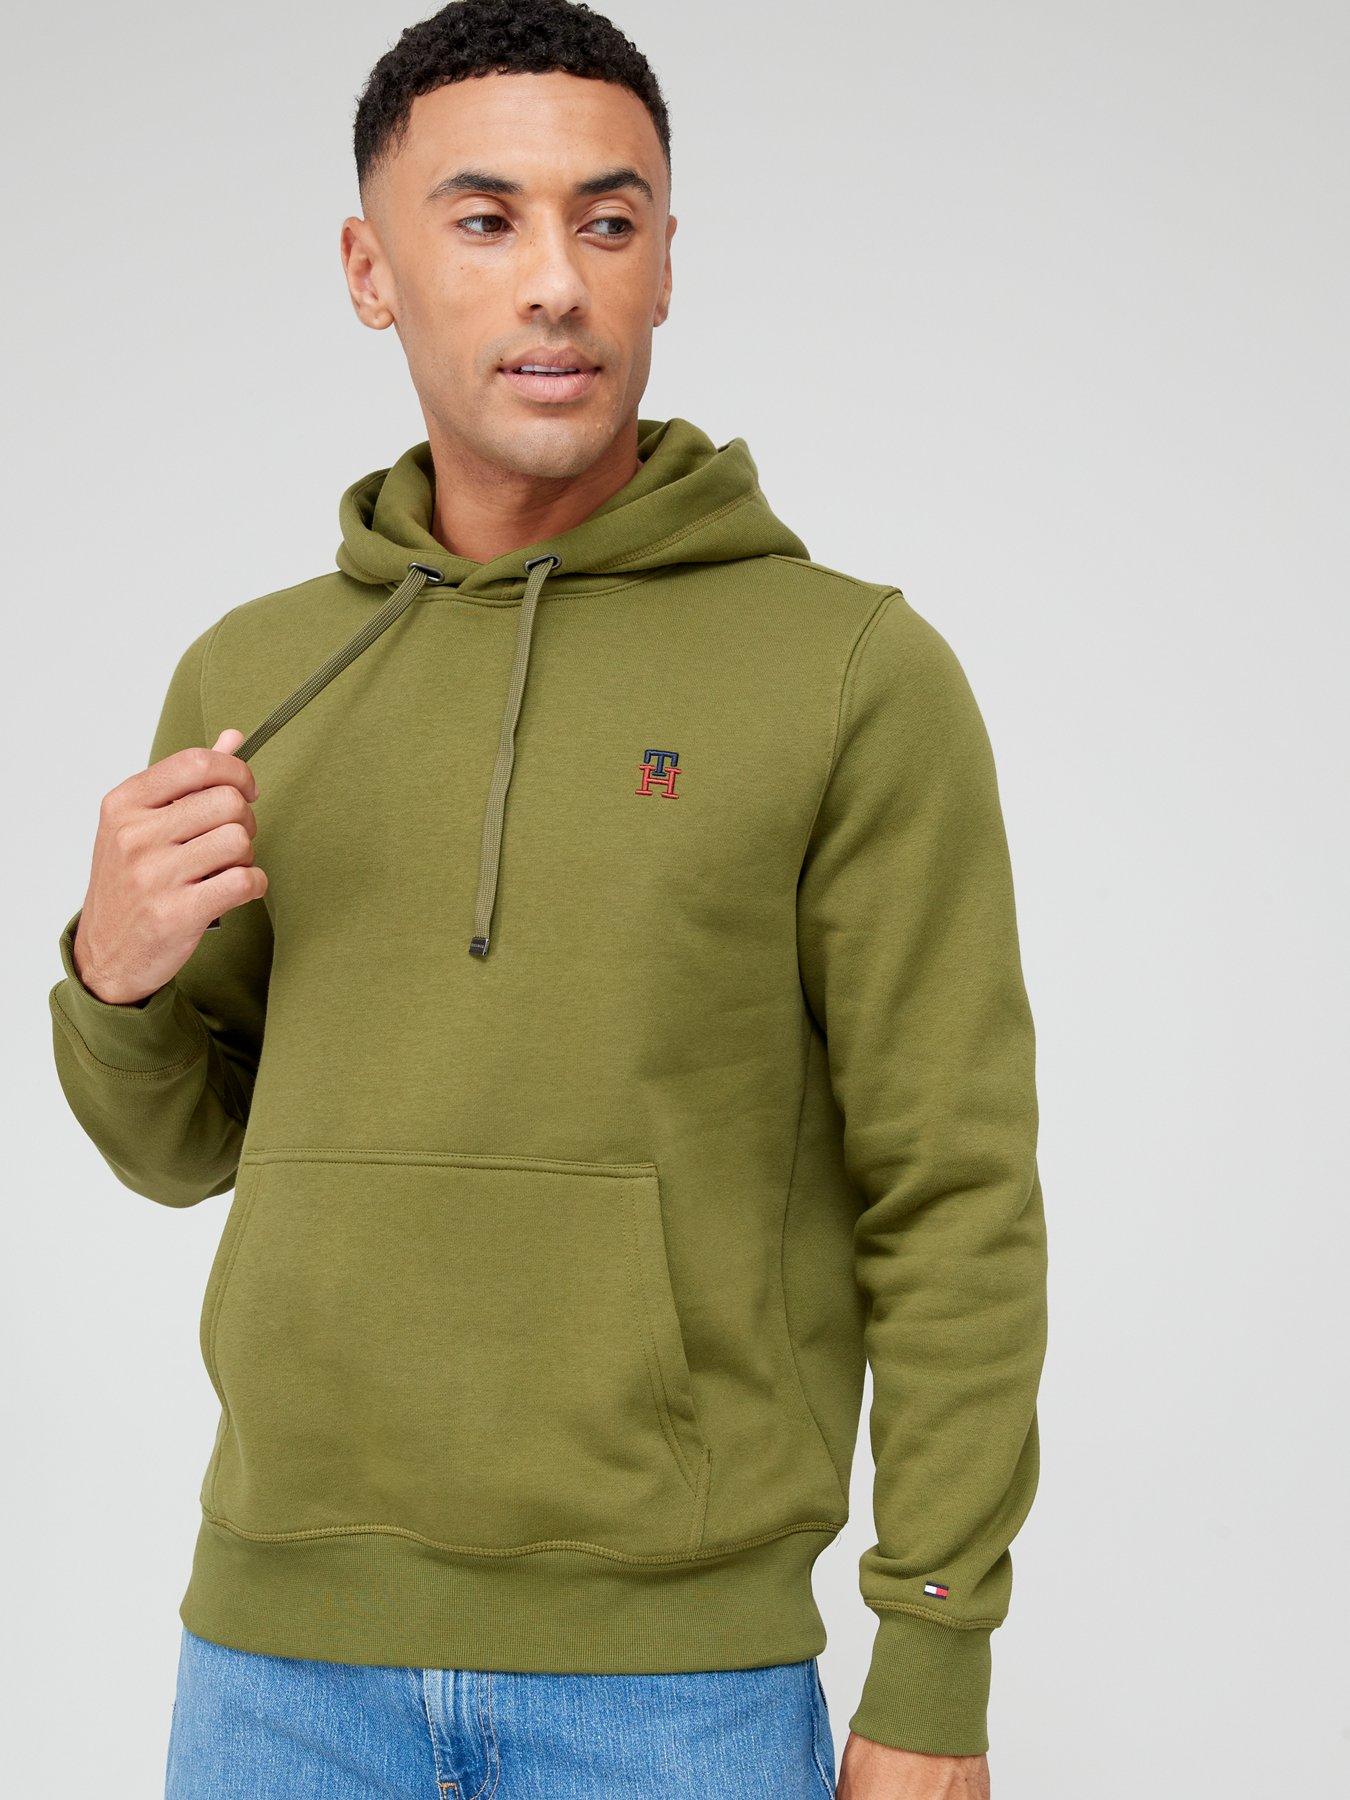 All Black Friday Deals | Tommy | Offers L | All hilfiger